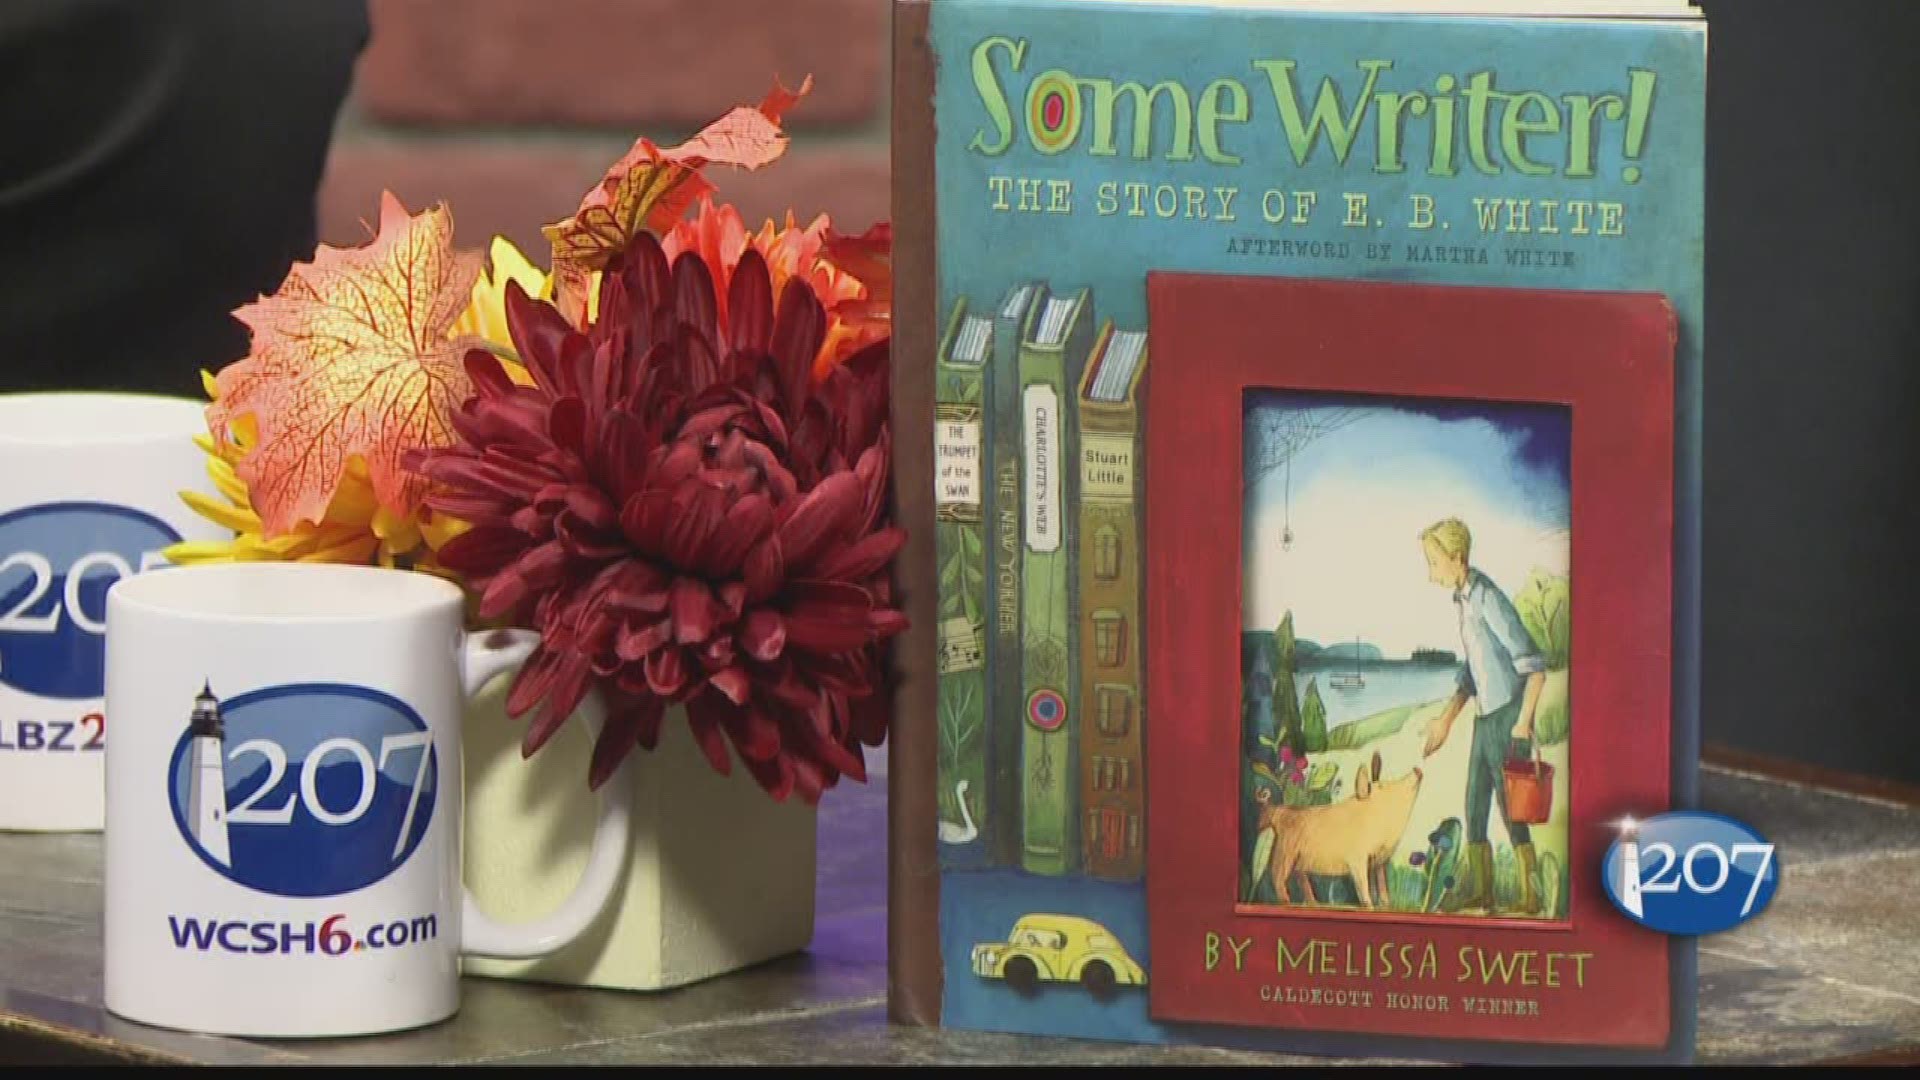 "Some Writer!: The Story of E.B. White" - Melissa Sweet